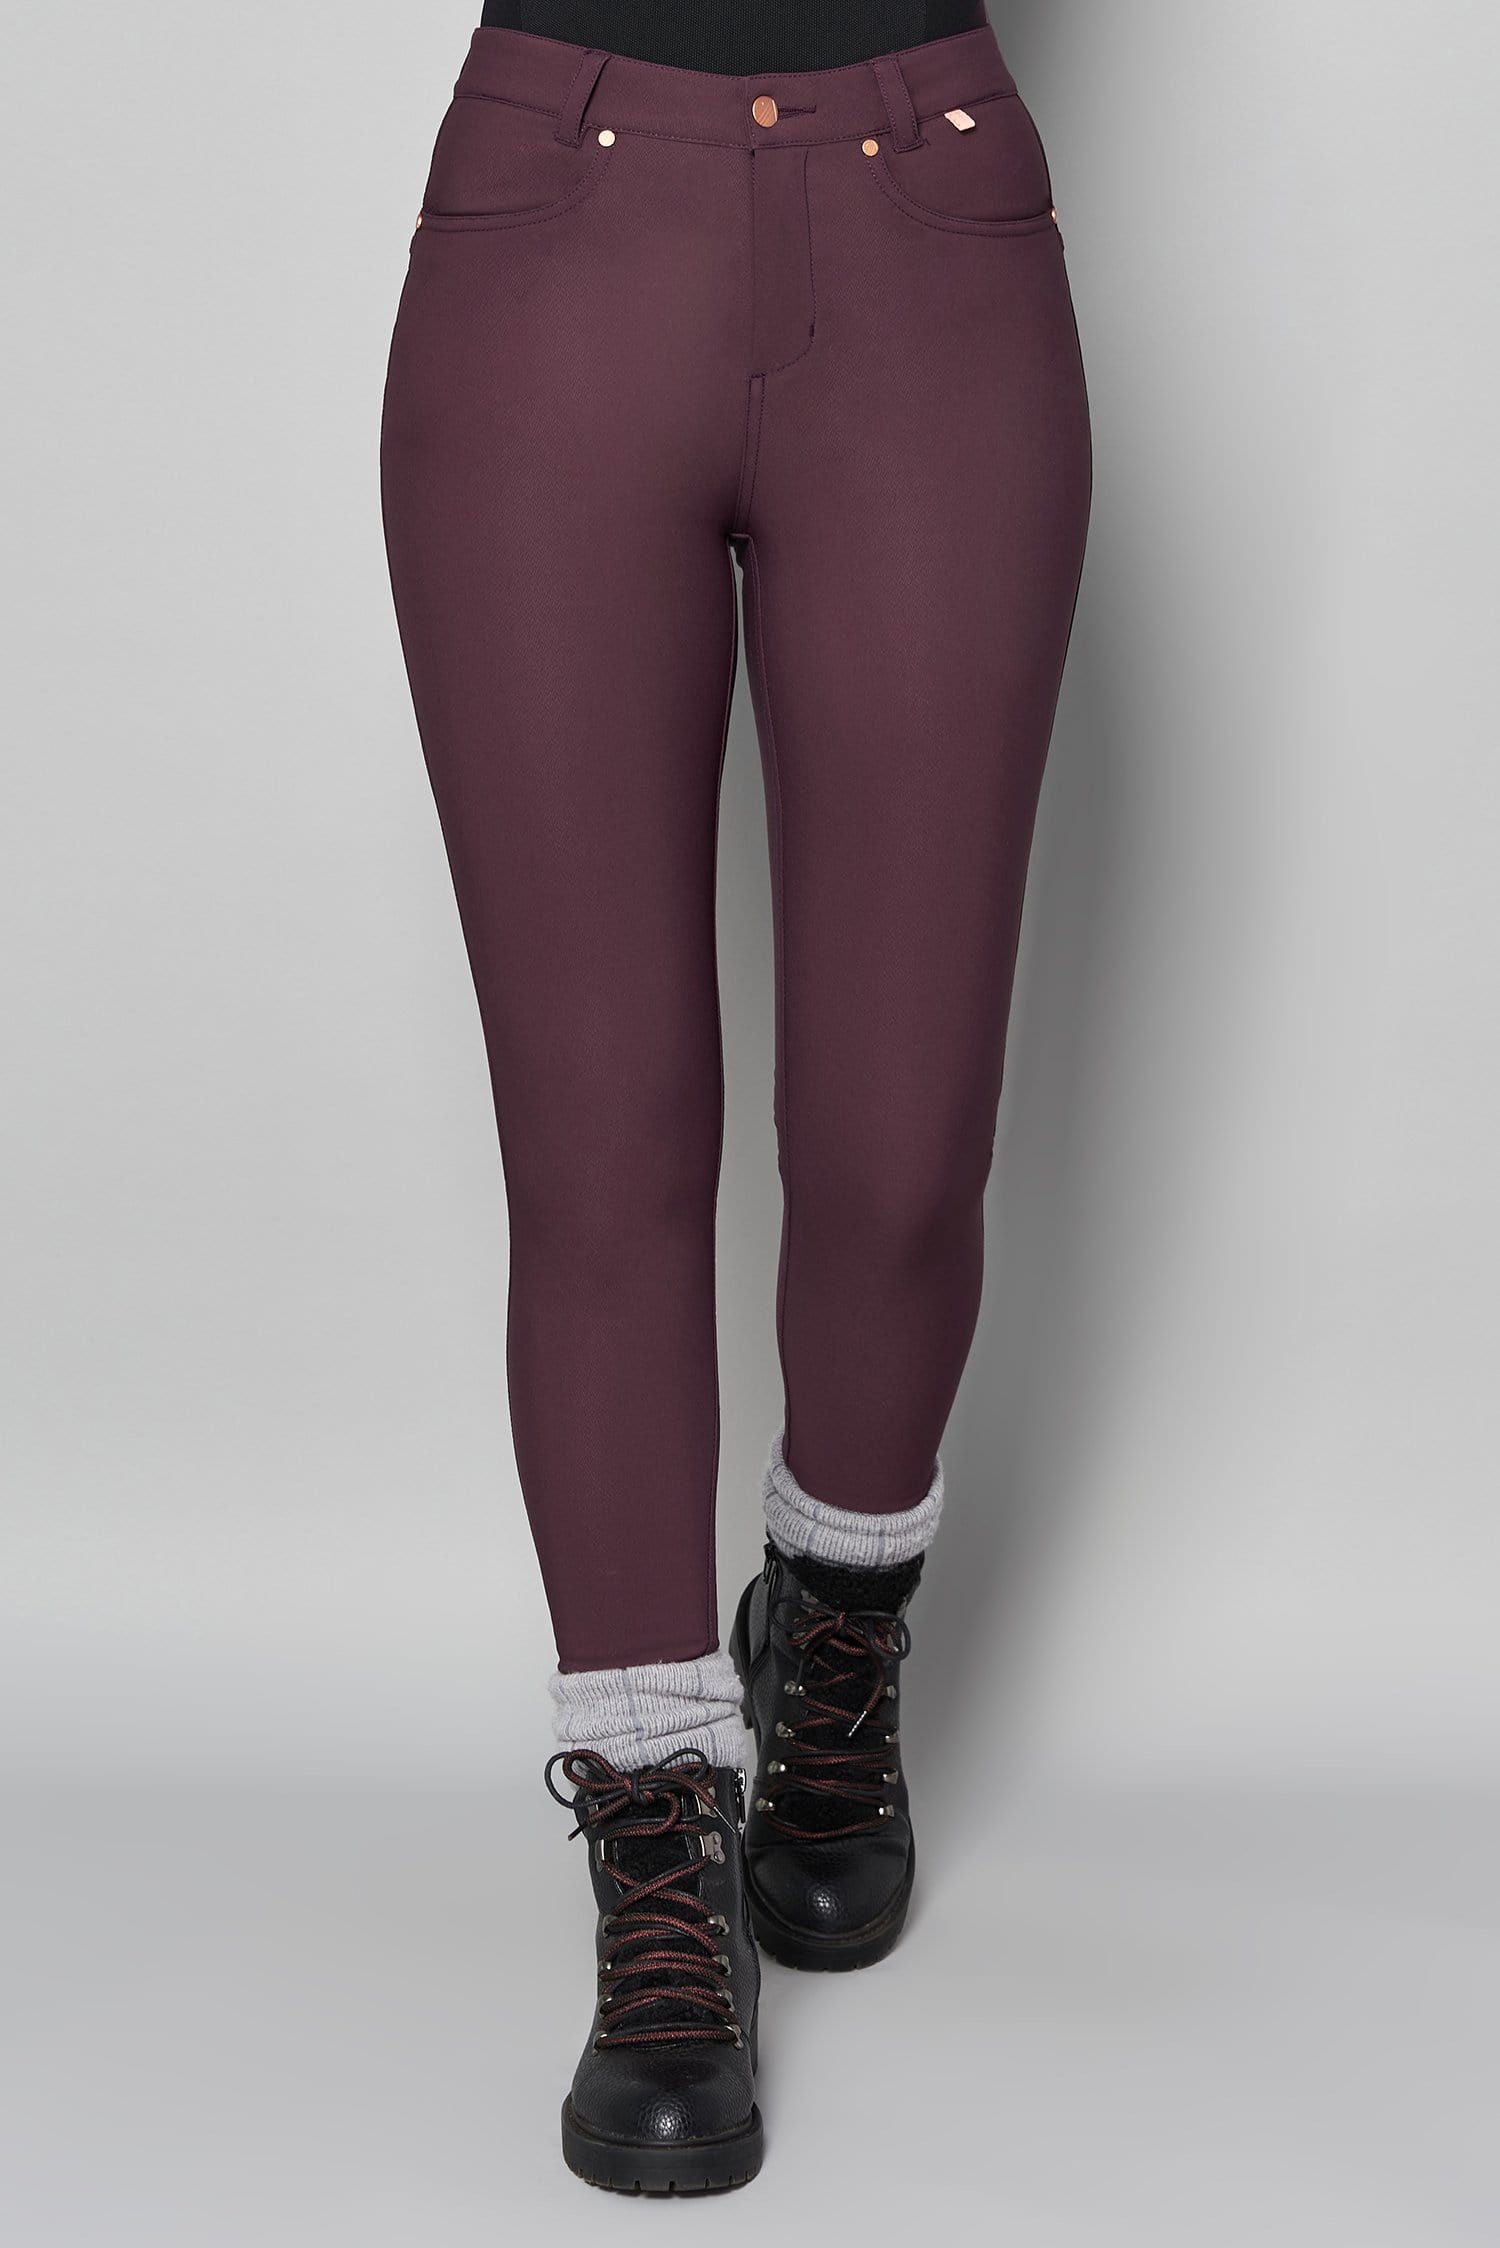 Thermal Skinny Outdoor Trousers - Aubergine - 28p / Uk10 - Womens - Acai Outdoorwear